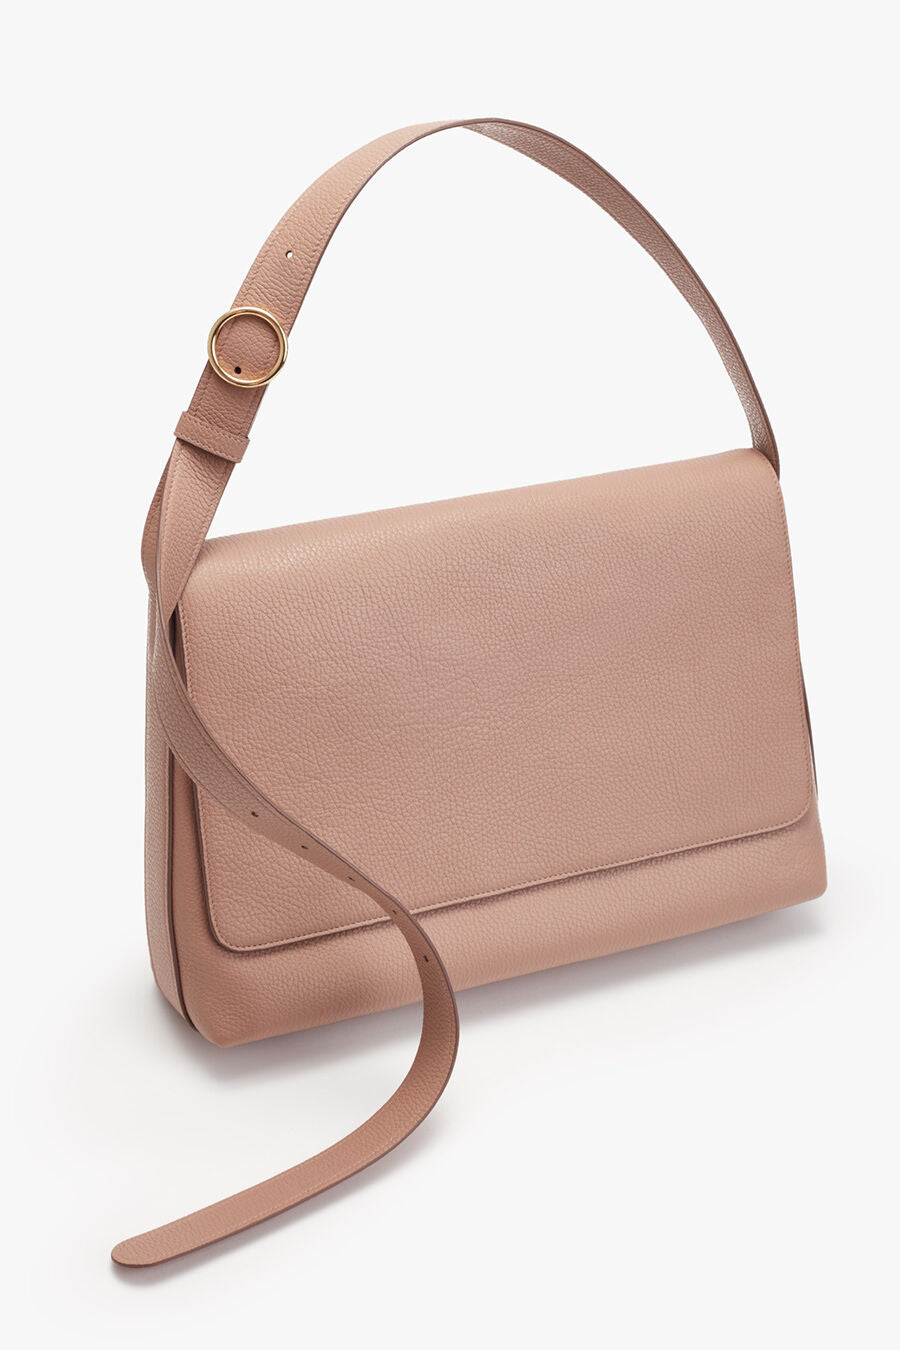 Handbag with adjustable strap and flap closure leaning against a plain background.